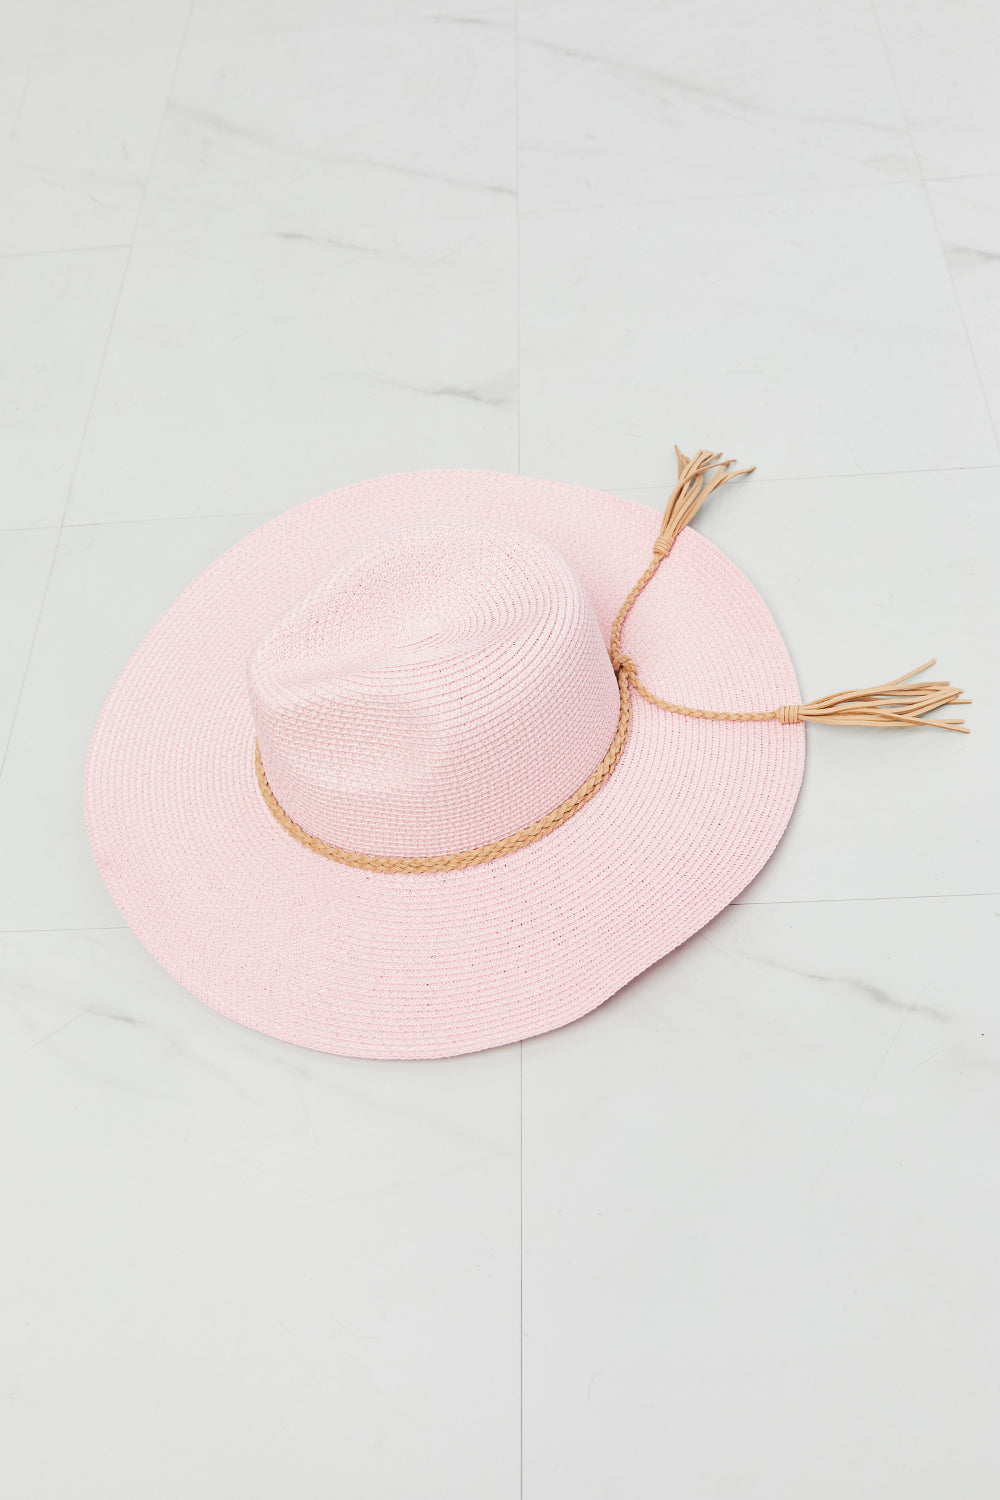 Fame Route To Paradise Straw Hat - Tigbuls Variety Fashion